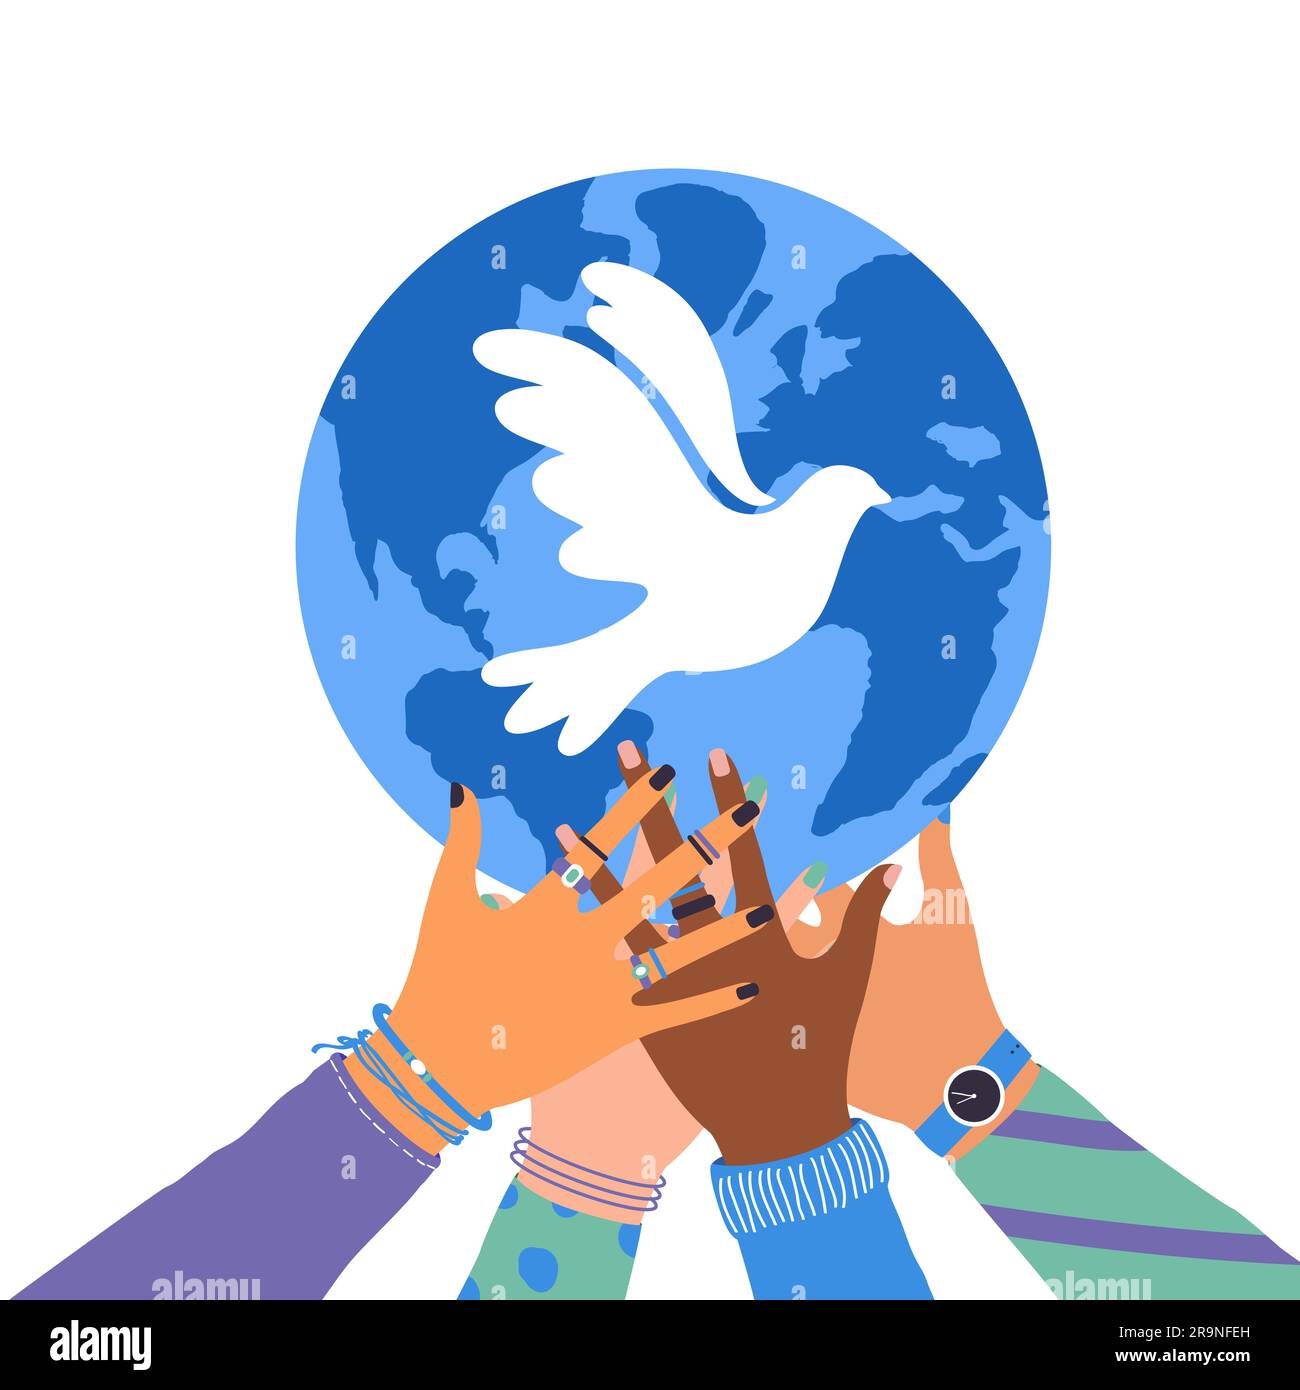 Vector illustration of human hands holding Earth globe with flying bird dove as a symbol of peace isolated on white background. International Peace Da Stock Vector